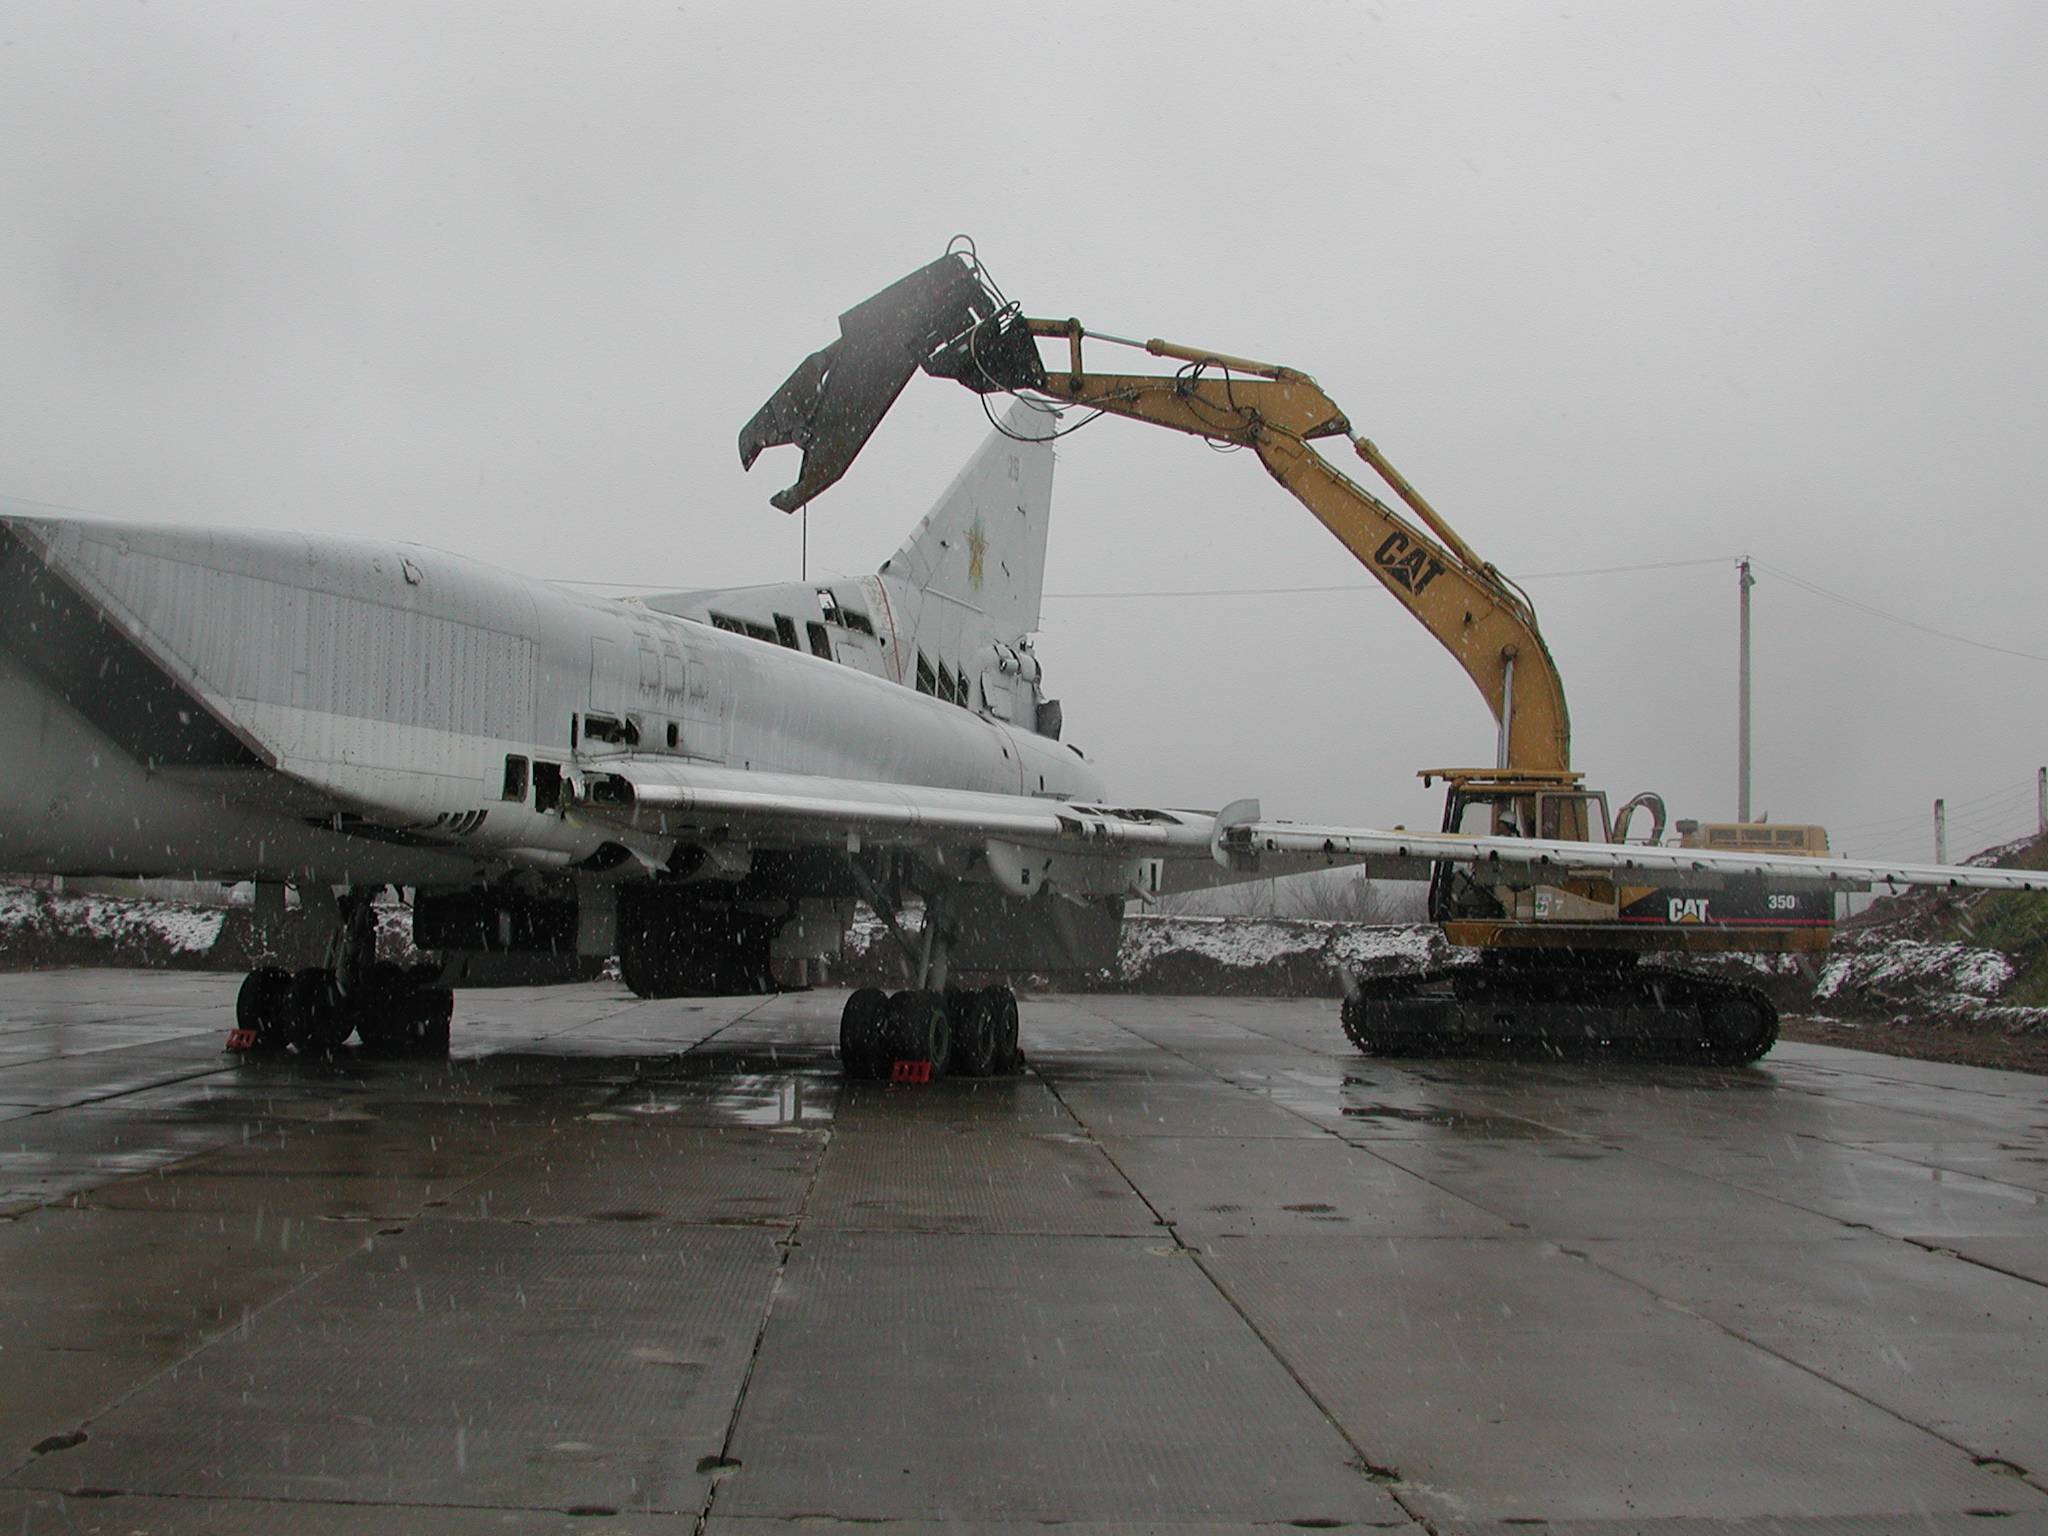 Tu-22M3 was destroyed with a bulldozer